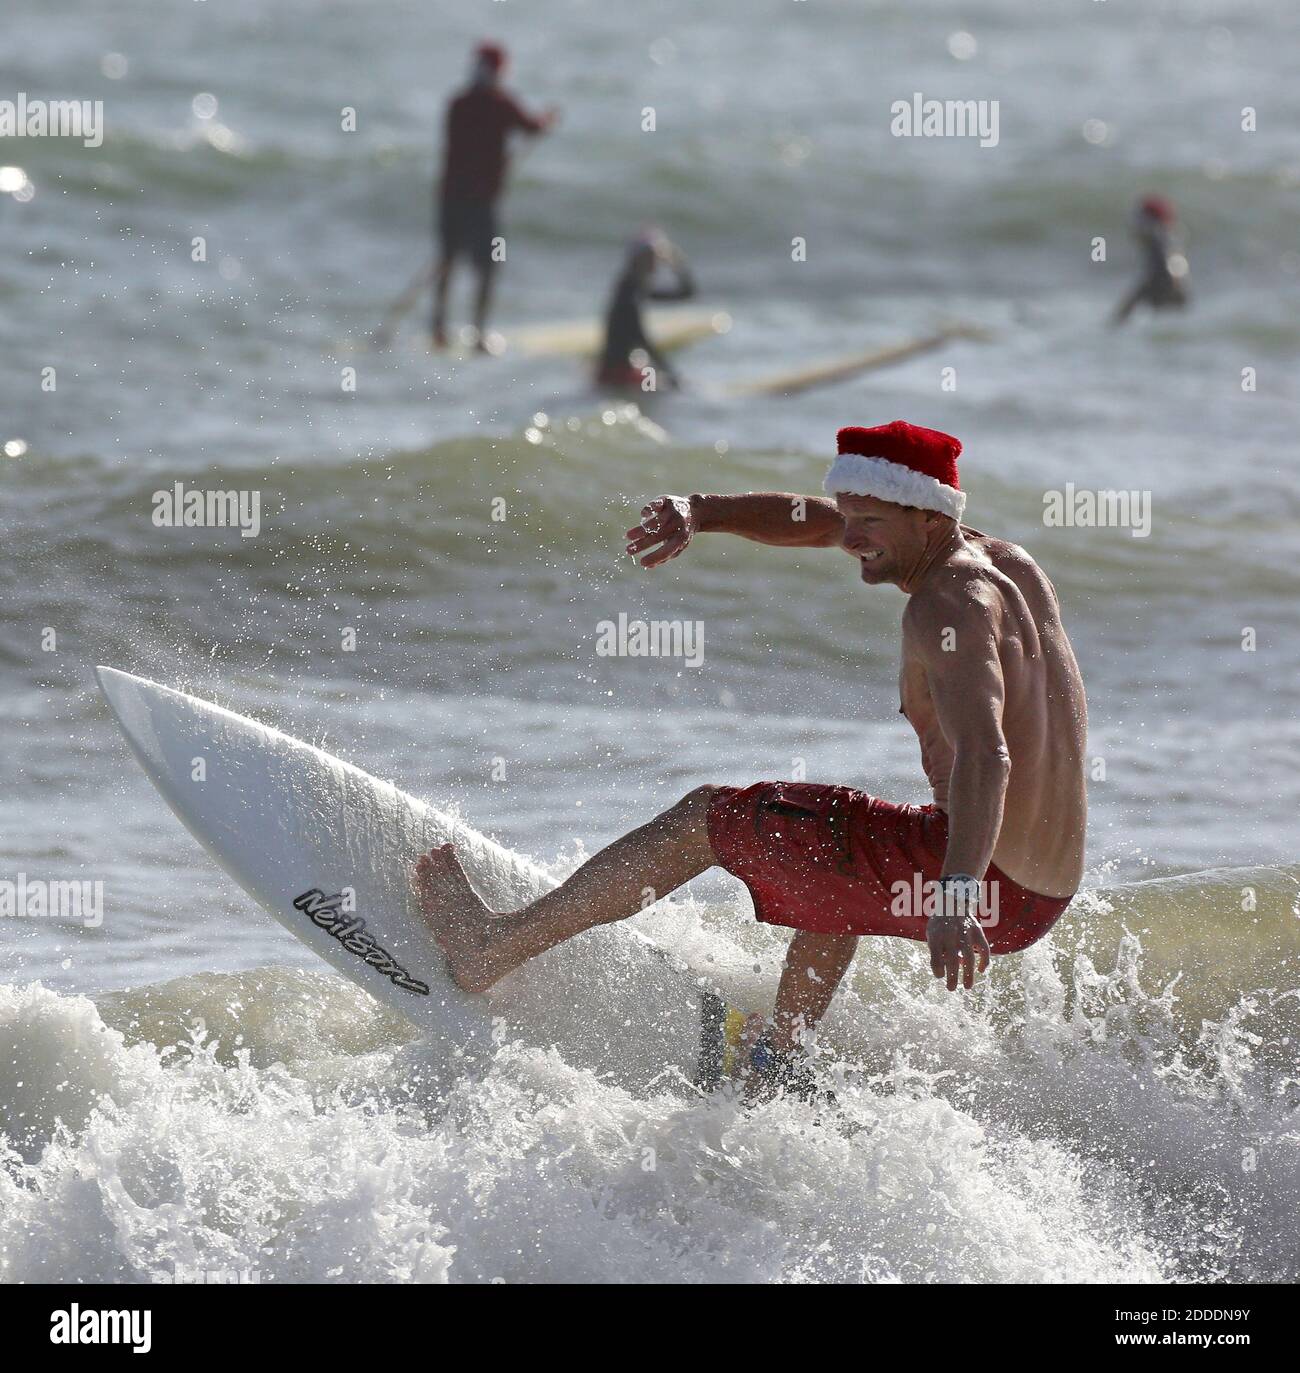 NO FILM, NO VIDEO, NO TV, NO DOCUMENTARY - Surfers don Santa outfits during  the Surfing Santas of Cocoa Beach fundraiser in Cocoa Beach, FL, USA, on  Wednesday, December 24, 2014. Hundreds